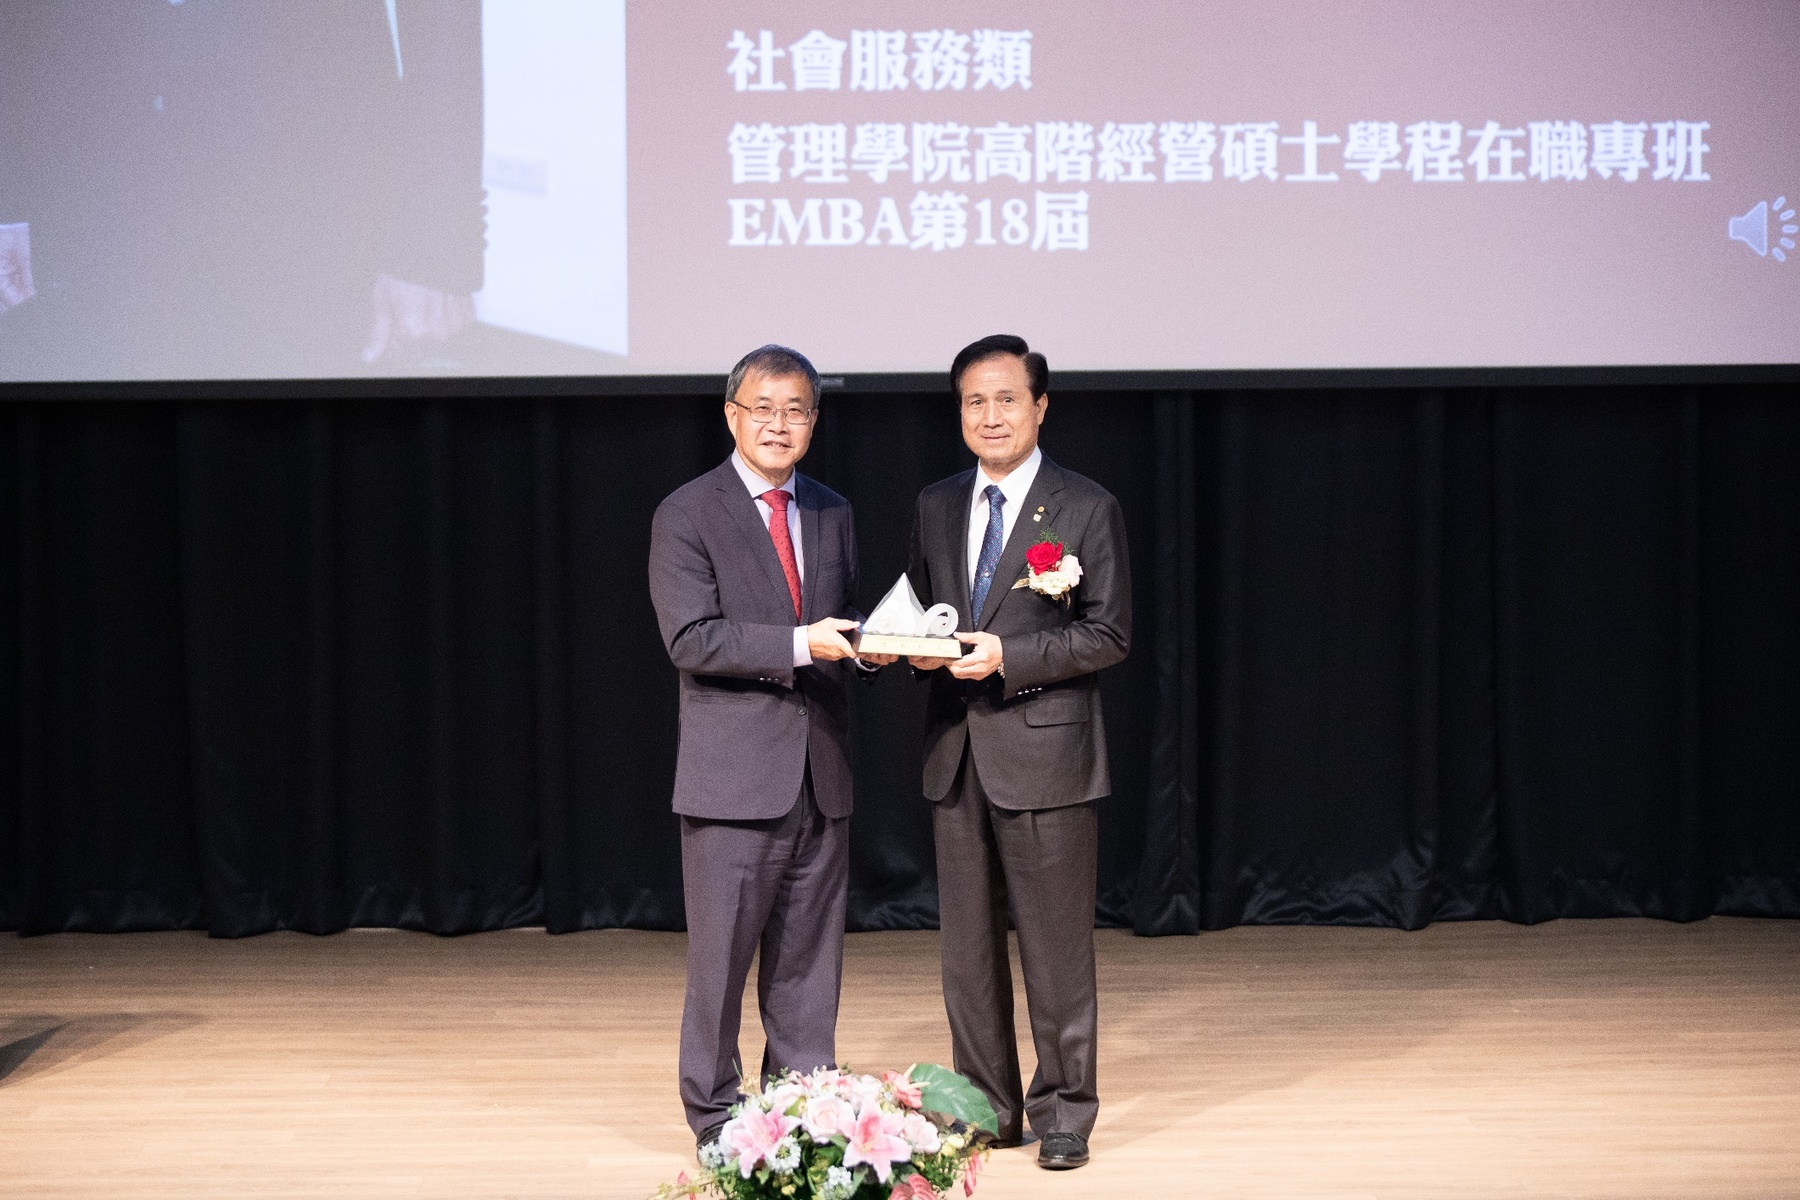 Chairman of Chen Lan Recycling Chiu-Lien Tseng (on the right) is a 2017 graduate of the EMBA program. He received the Outstanding Alumni Award in the category of Social Service.